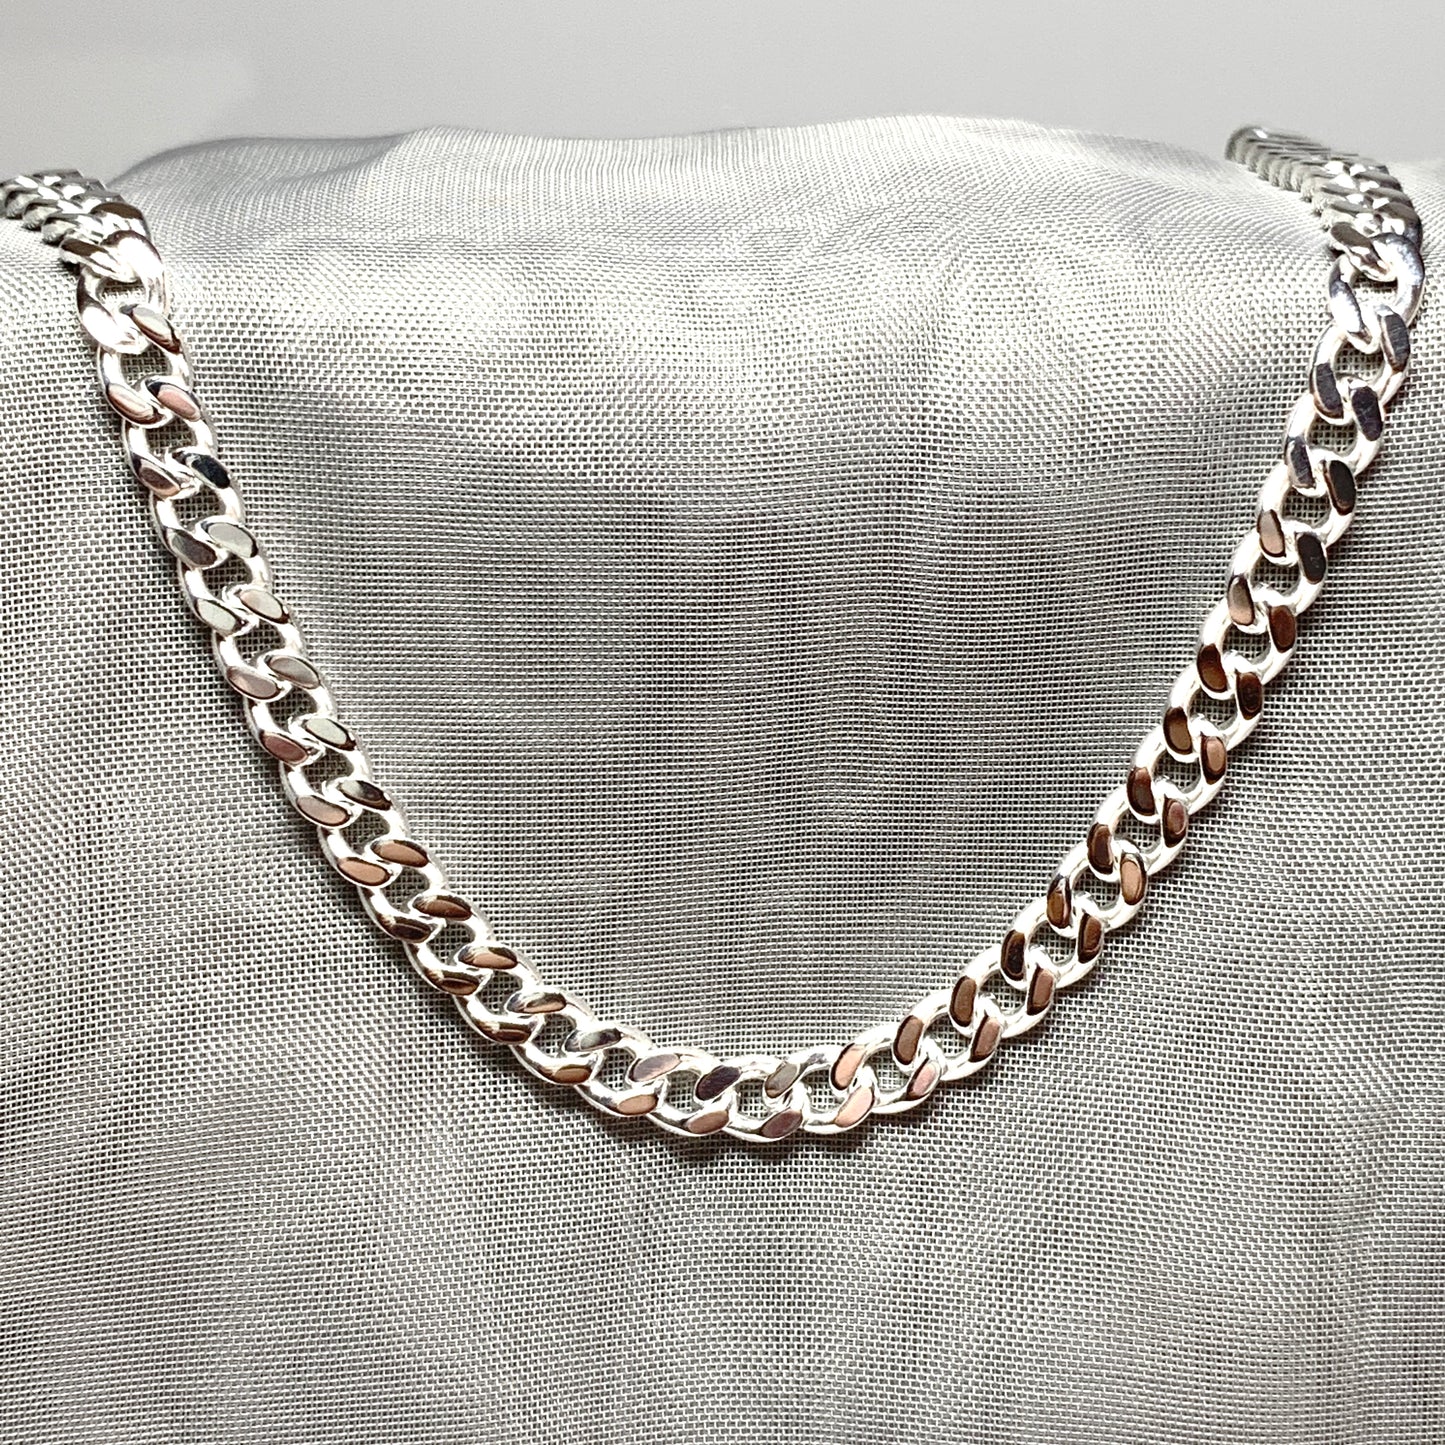 Men's necklace solid sterling silver diamond cut curb chain